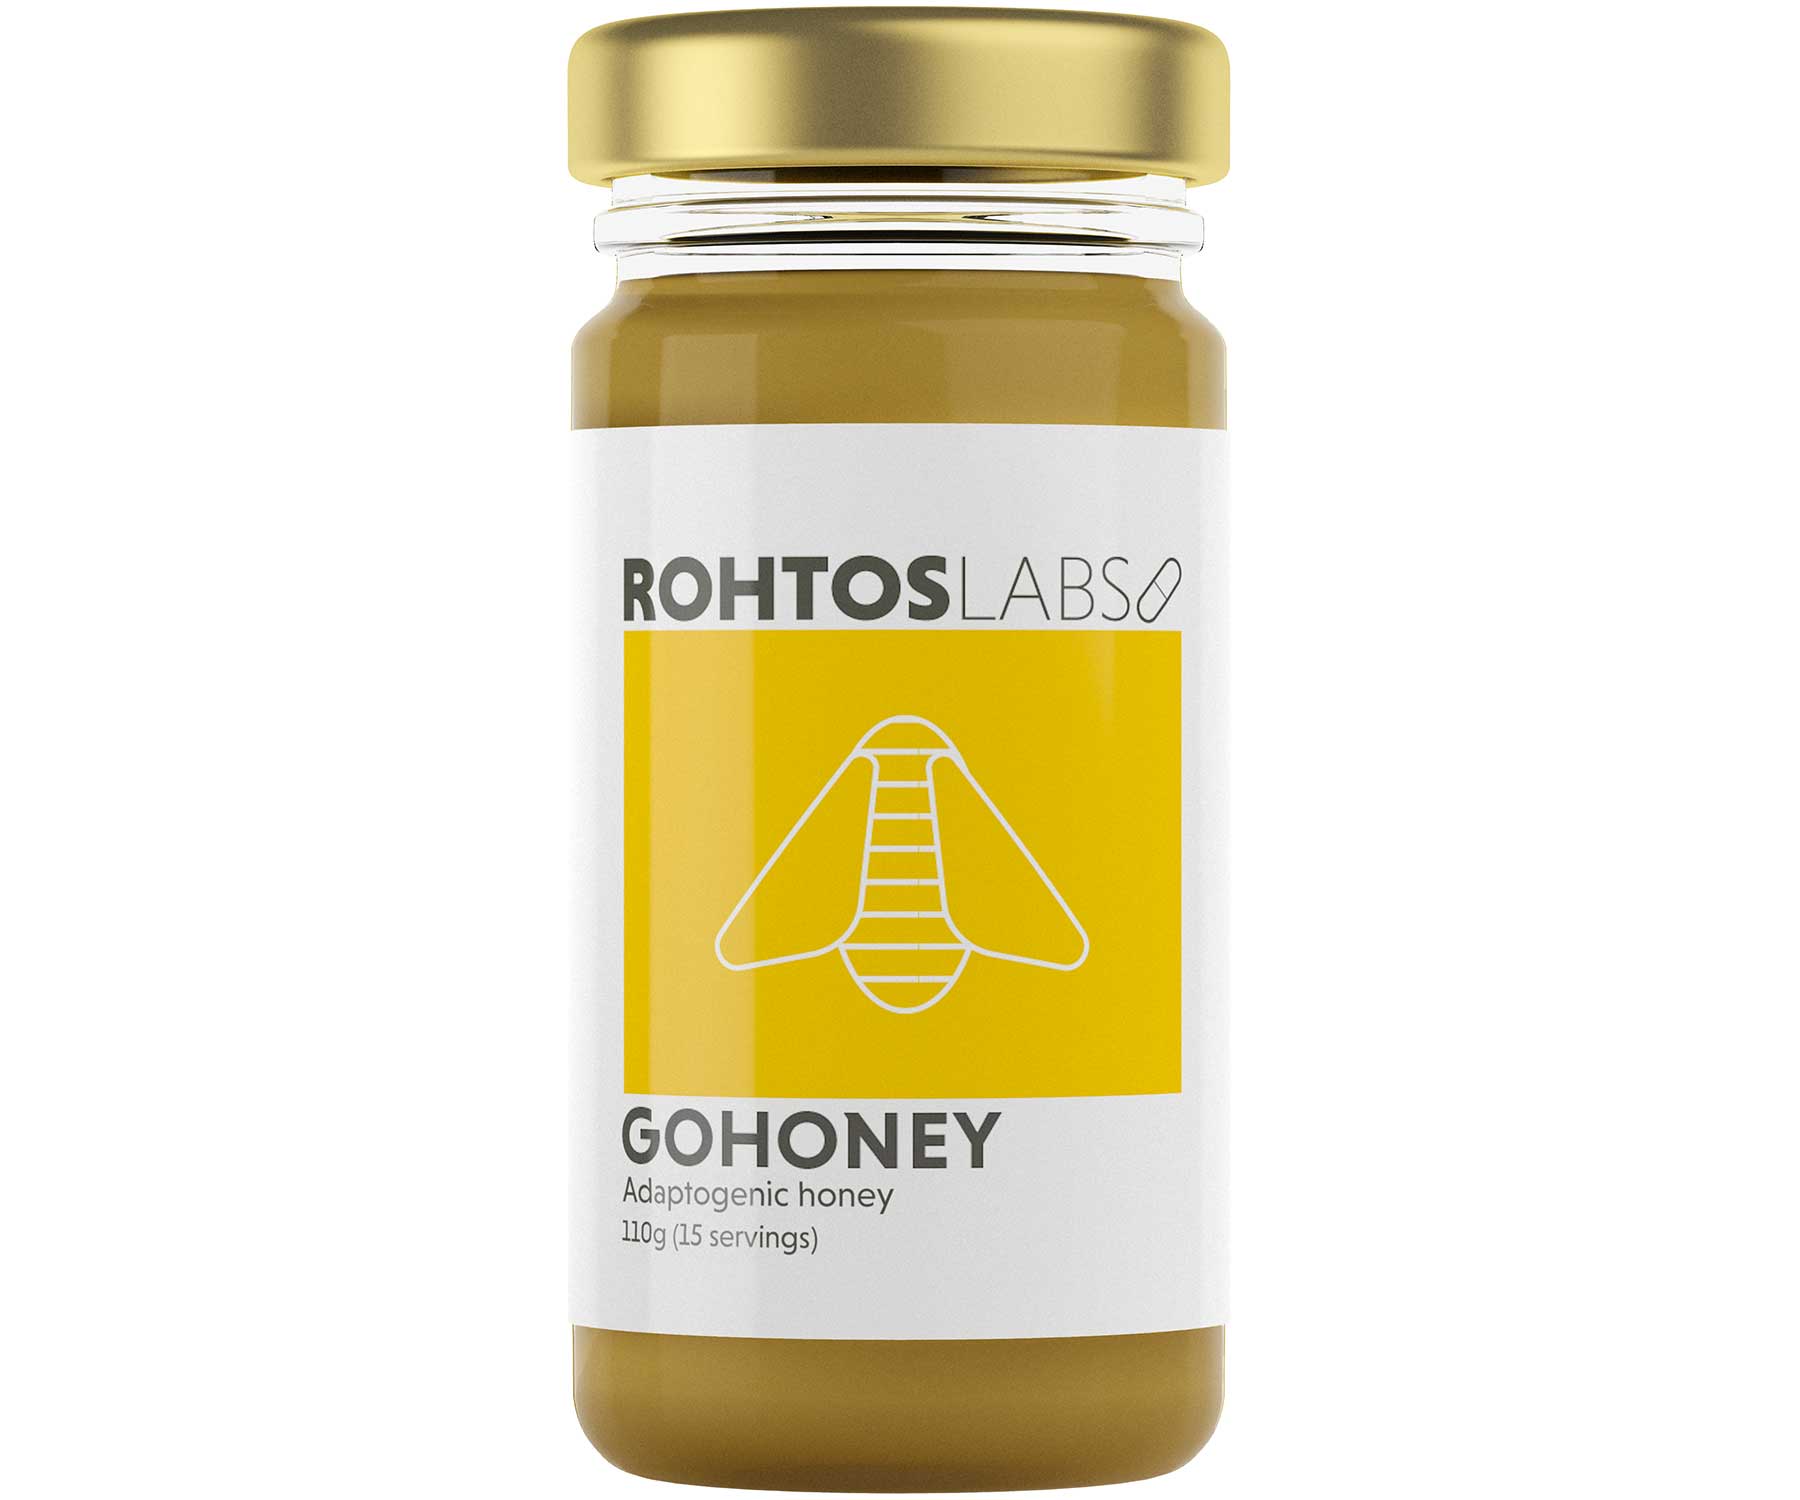 Gohoney contains Rhodiola and Eleuthero extracts in supplemental dosages, making it a supplement whose effect can be felt right away. 